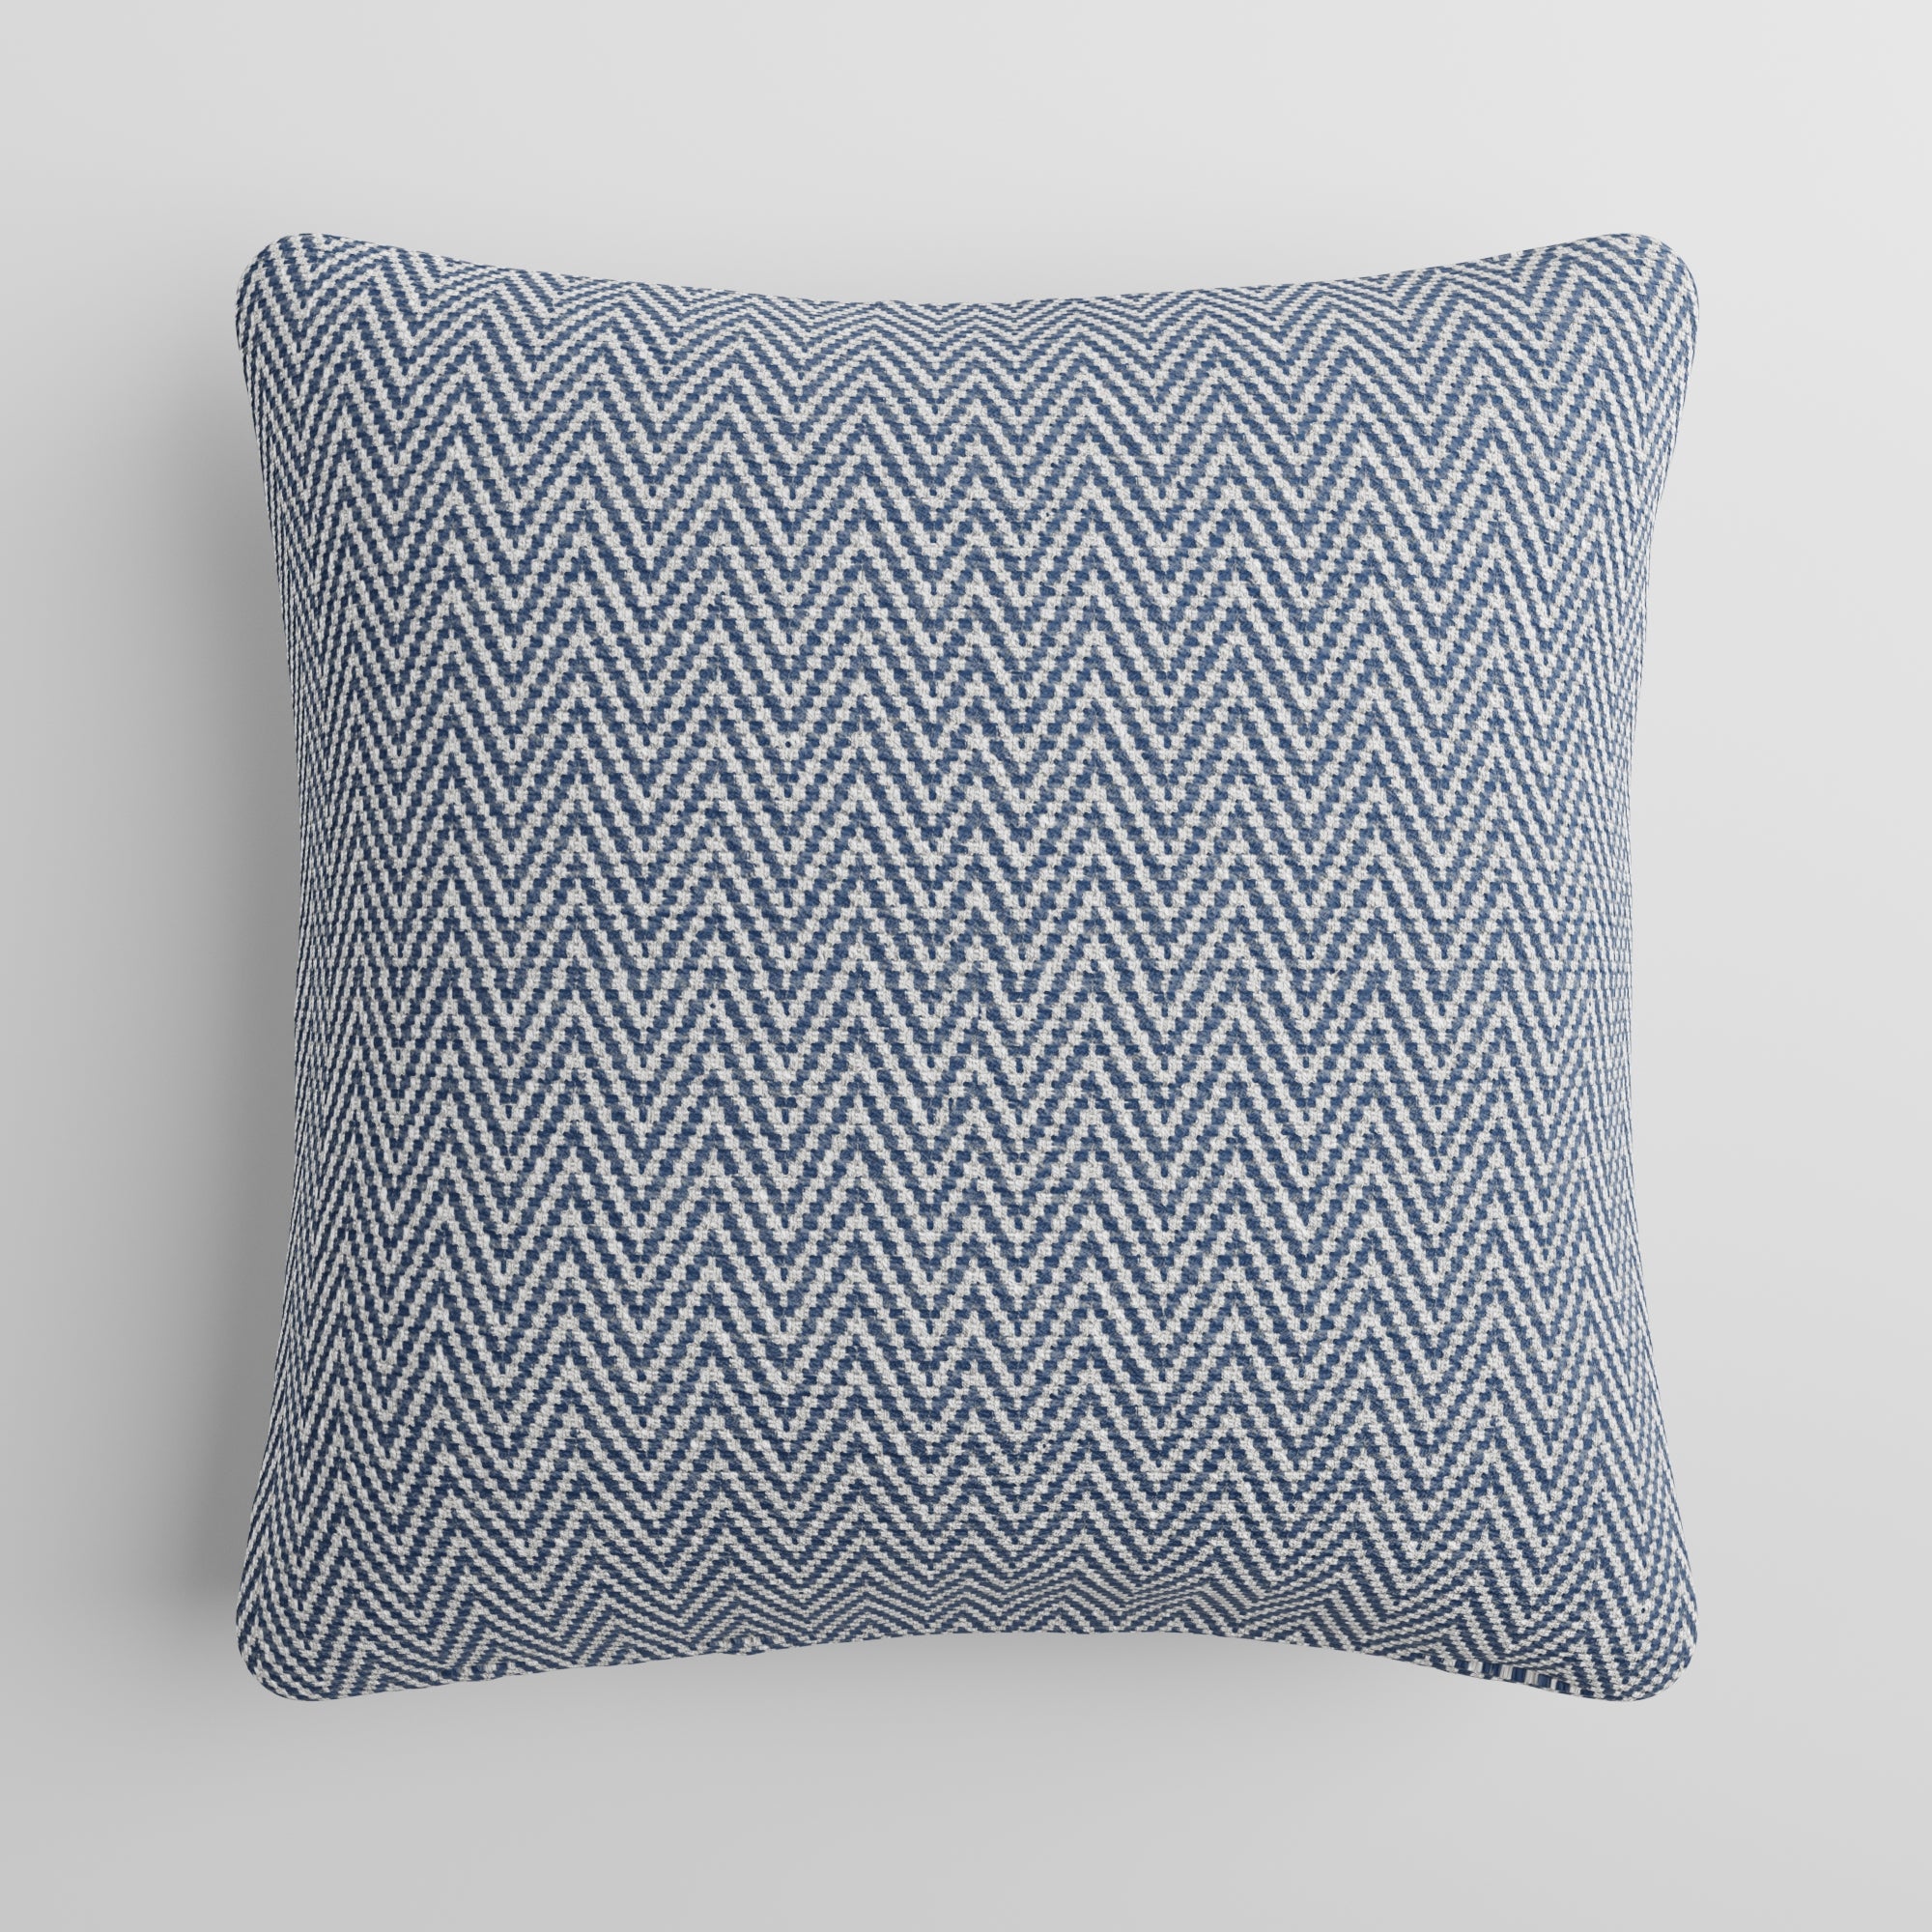 Everest Made to Order Cushion Cover Everest Navy